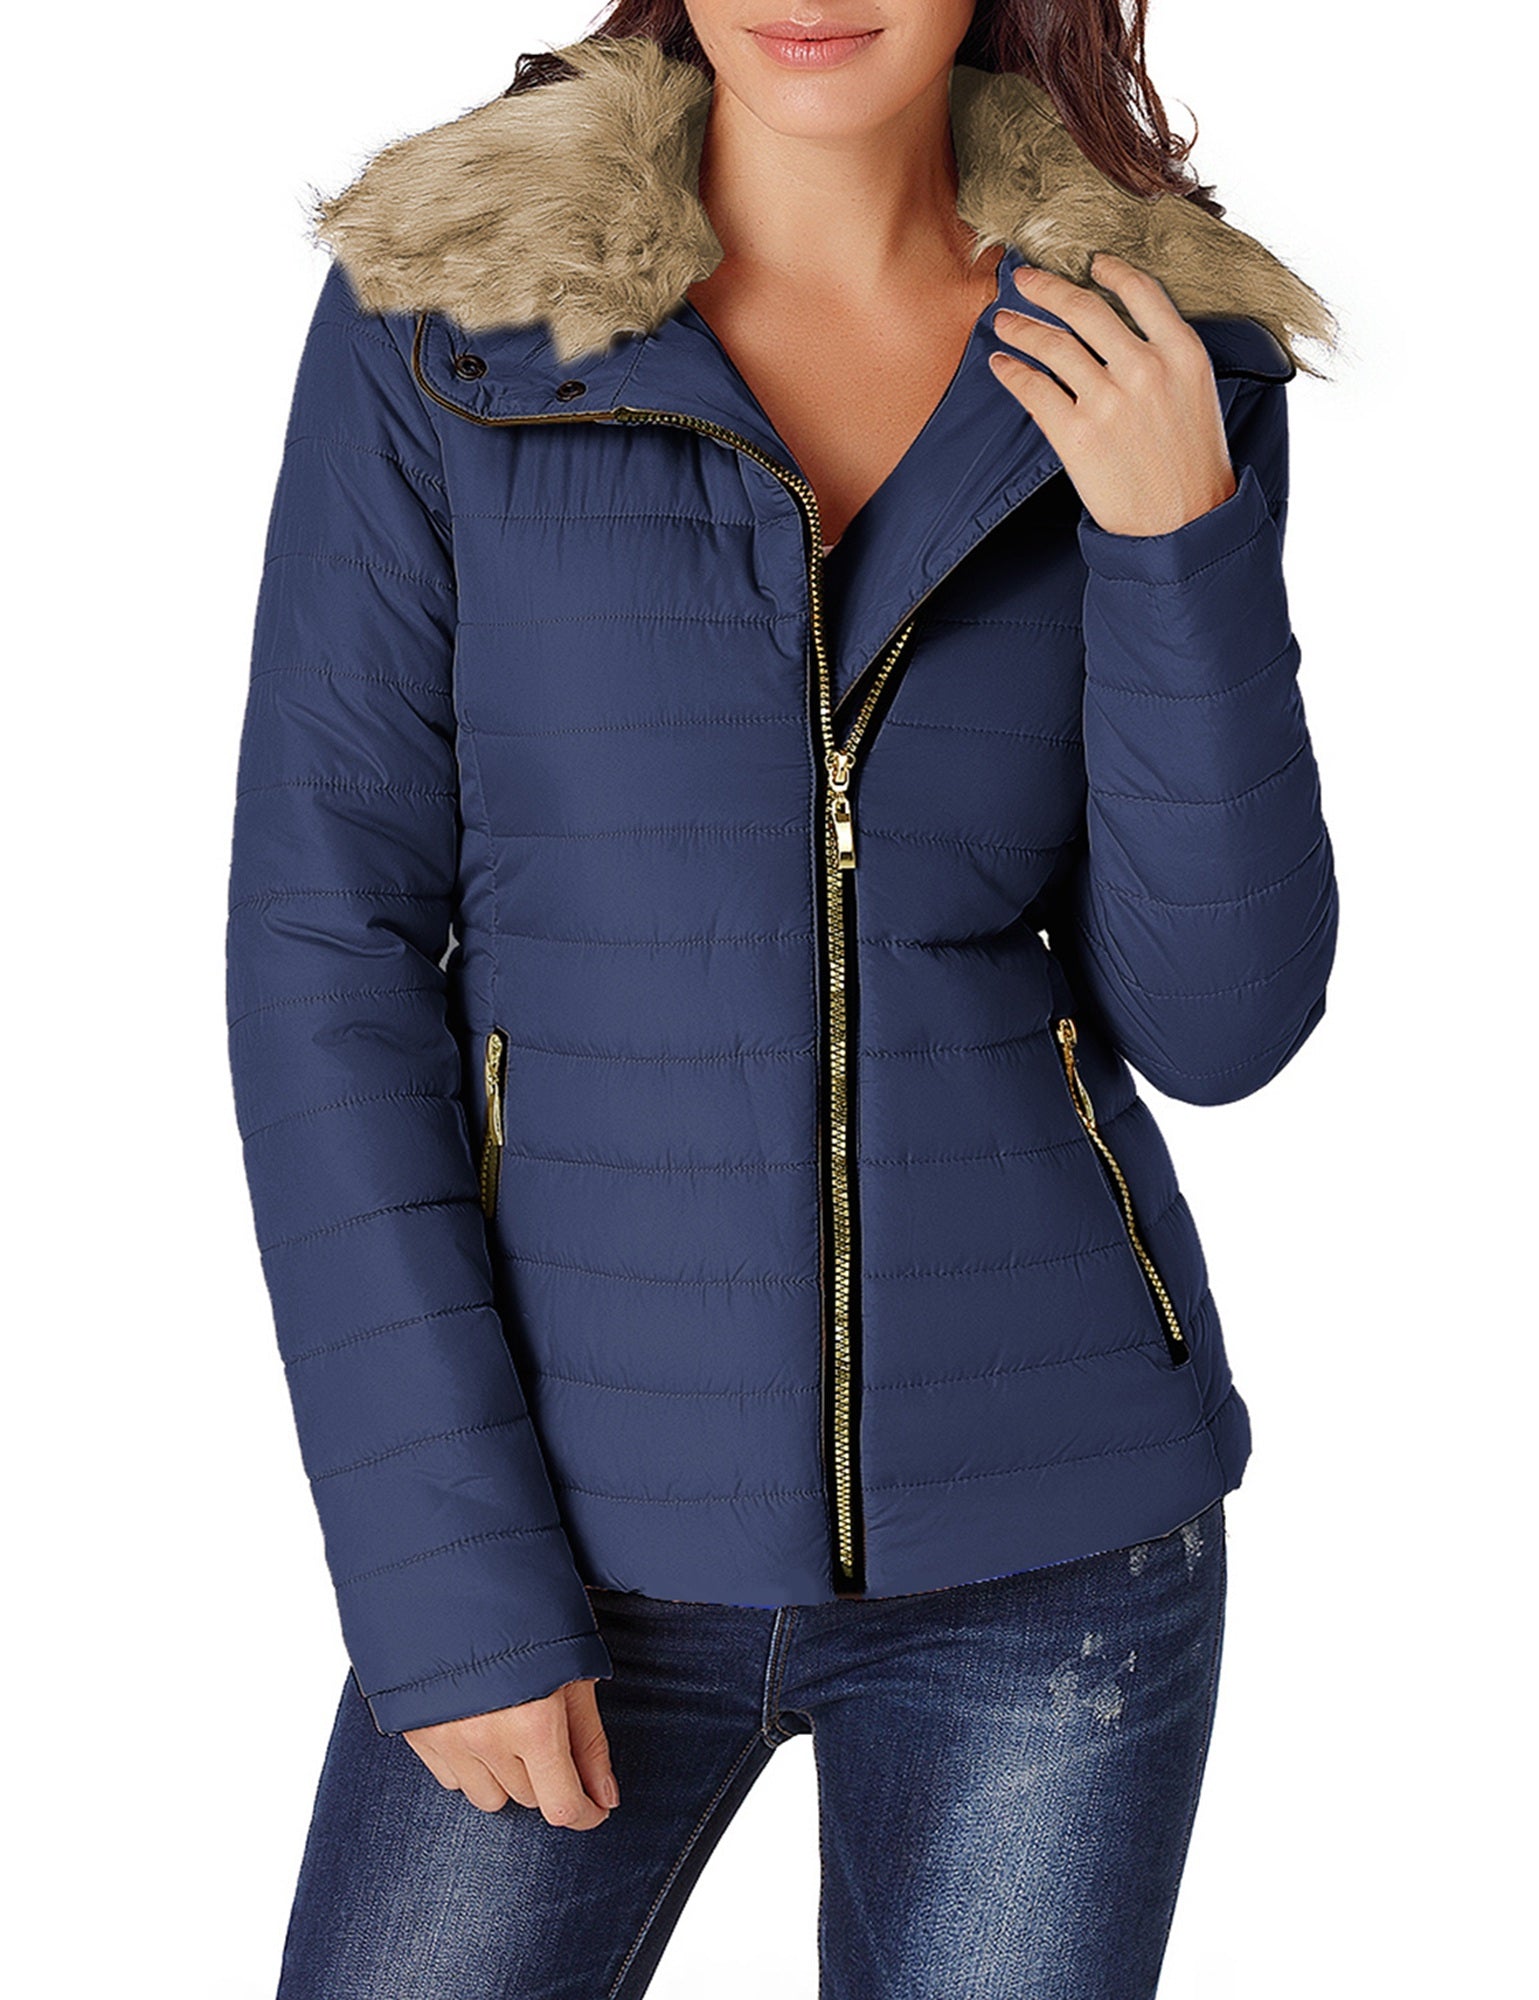 LC85117-5-2XL, LC85117-5-L, LC85117-5-M, LC85117-5-S, LC85117-5-XL, Estate Blue Winter Coats for Women Camel Faux Fur Collar Trim Black Quilted Jacket Outerwear